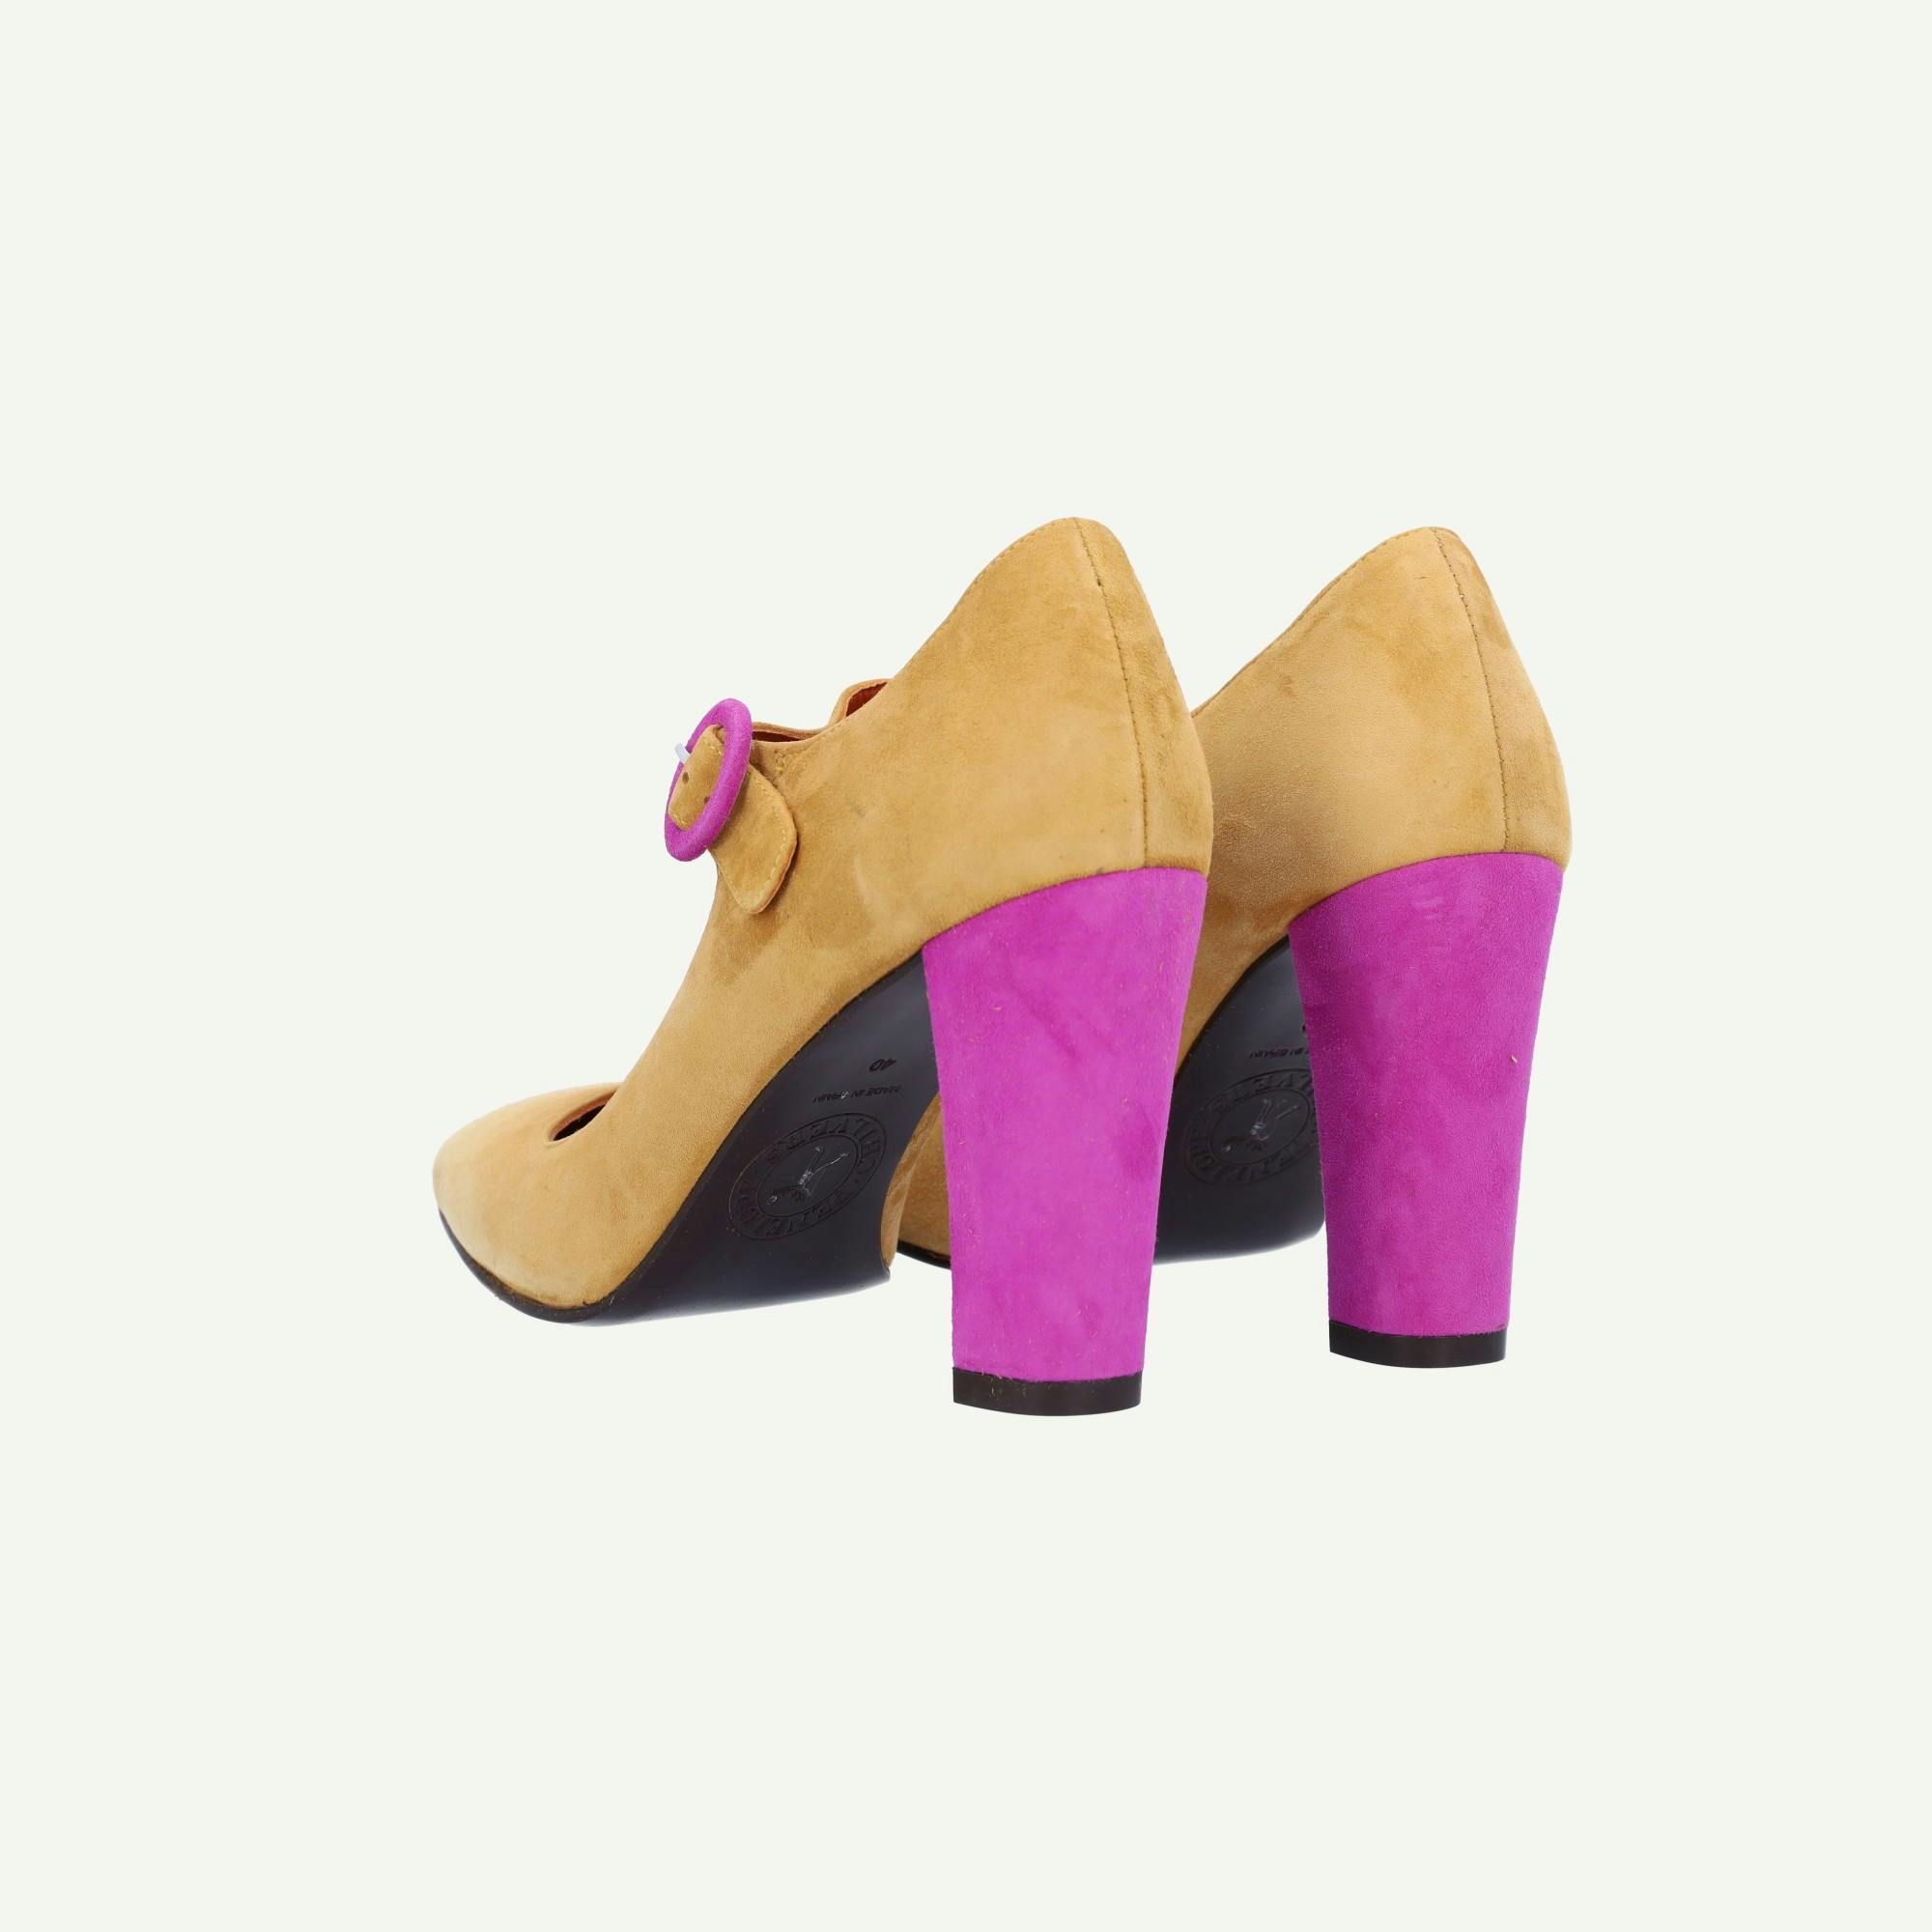 Penelope Chilvers Shoes image 17